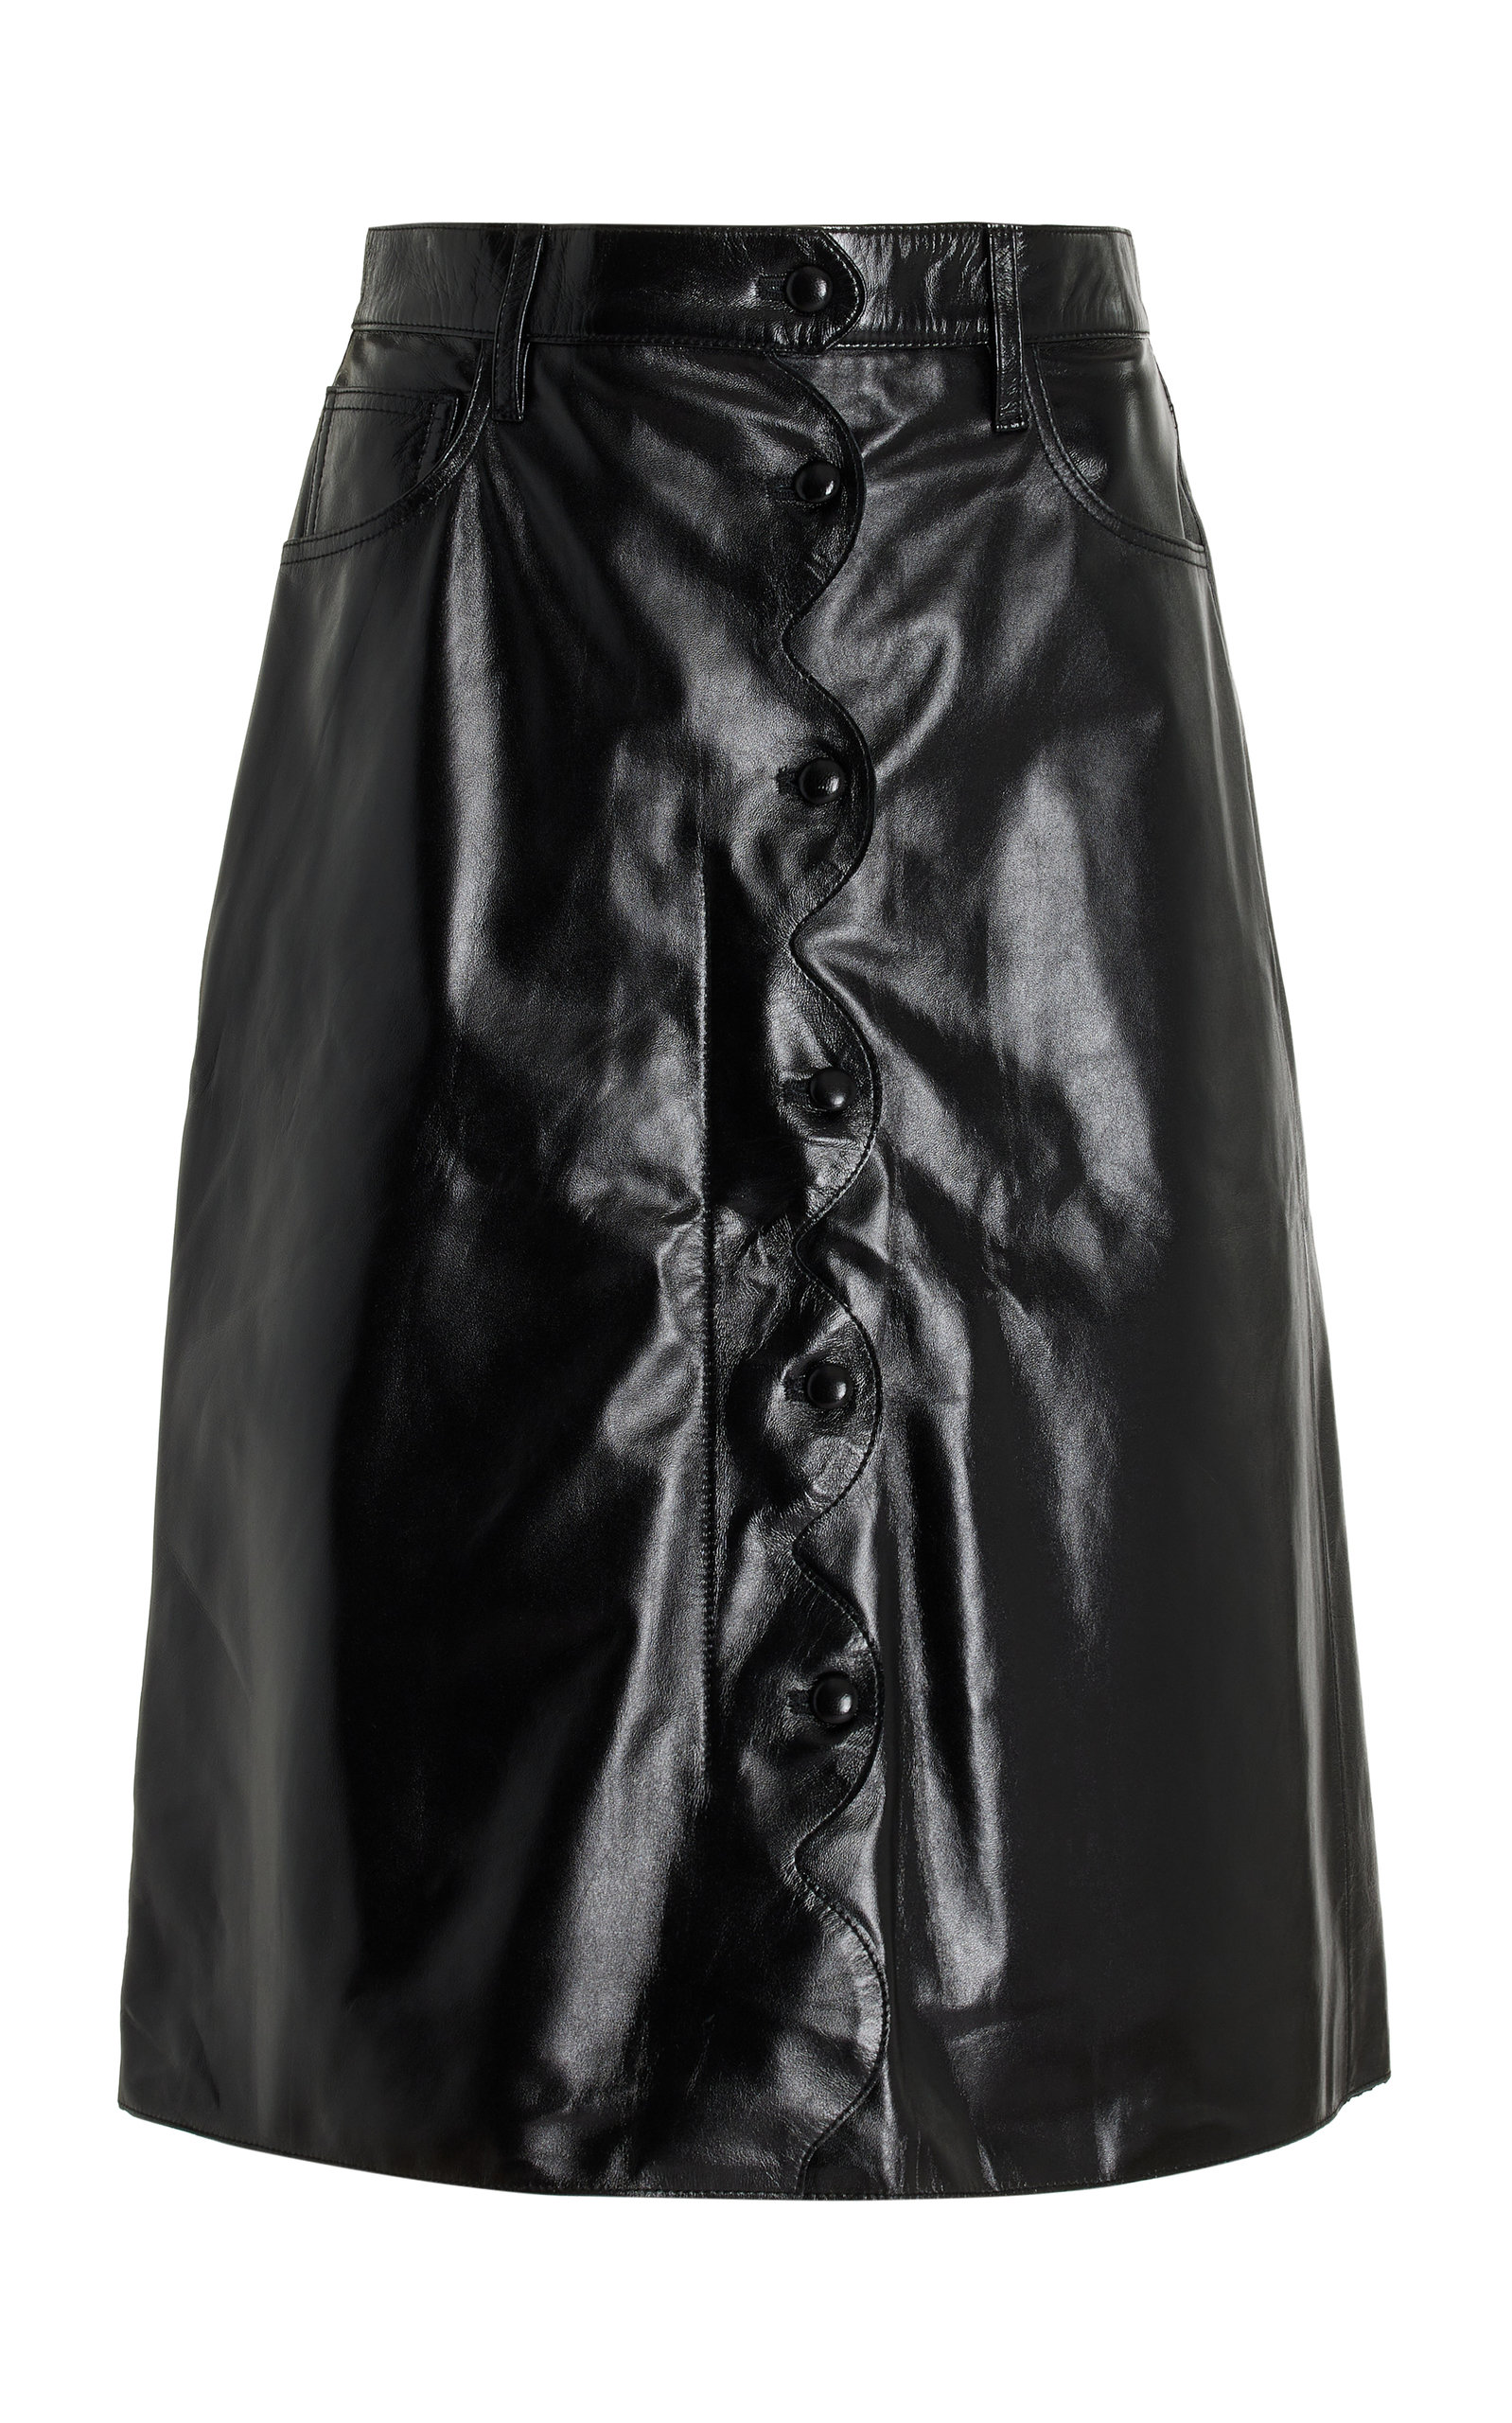 CITIZENS OF HUMANITY SCALLOPED PATENT LEATHER MIDI SKIRT